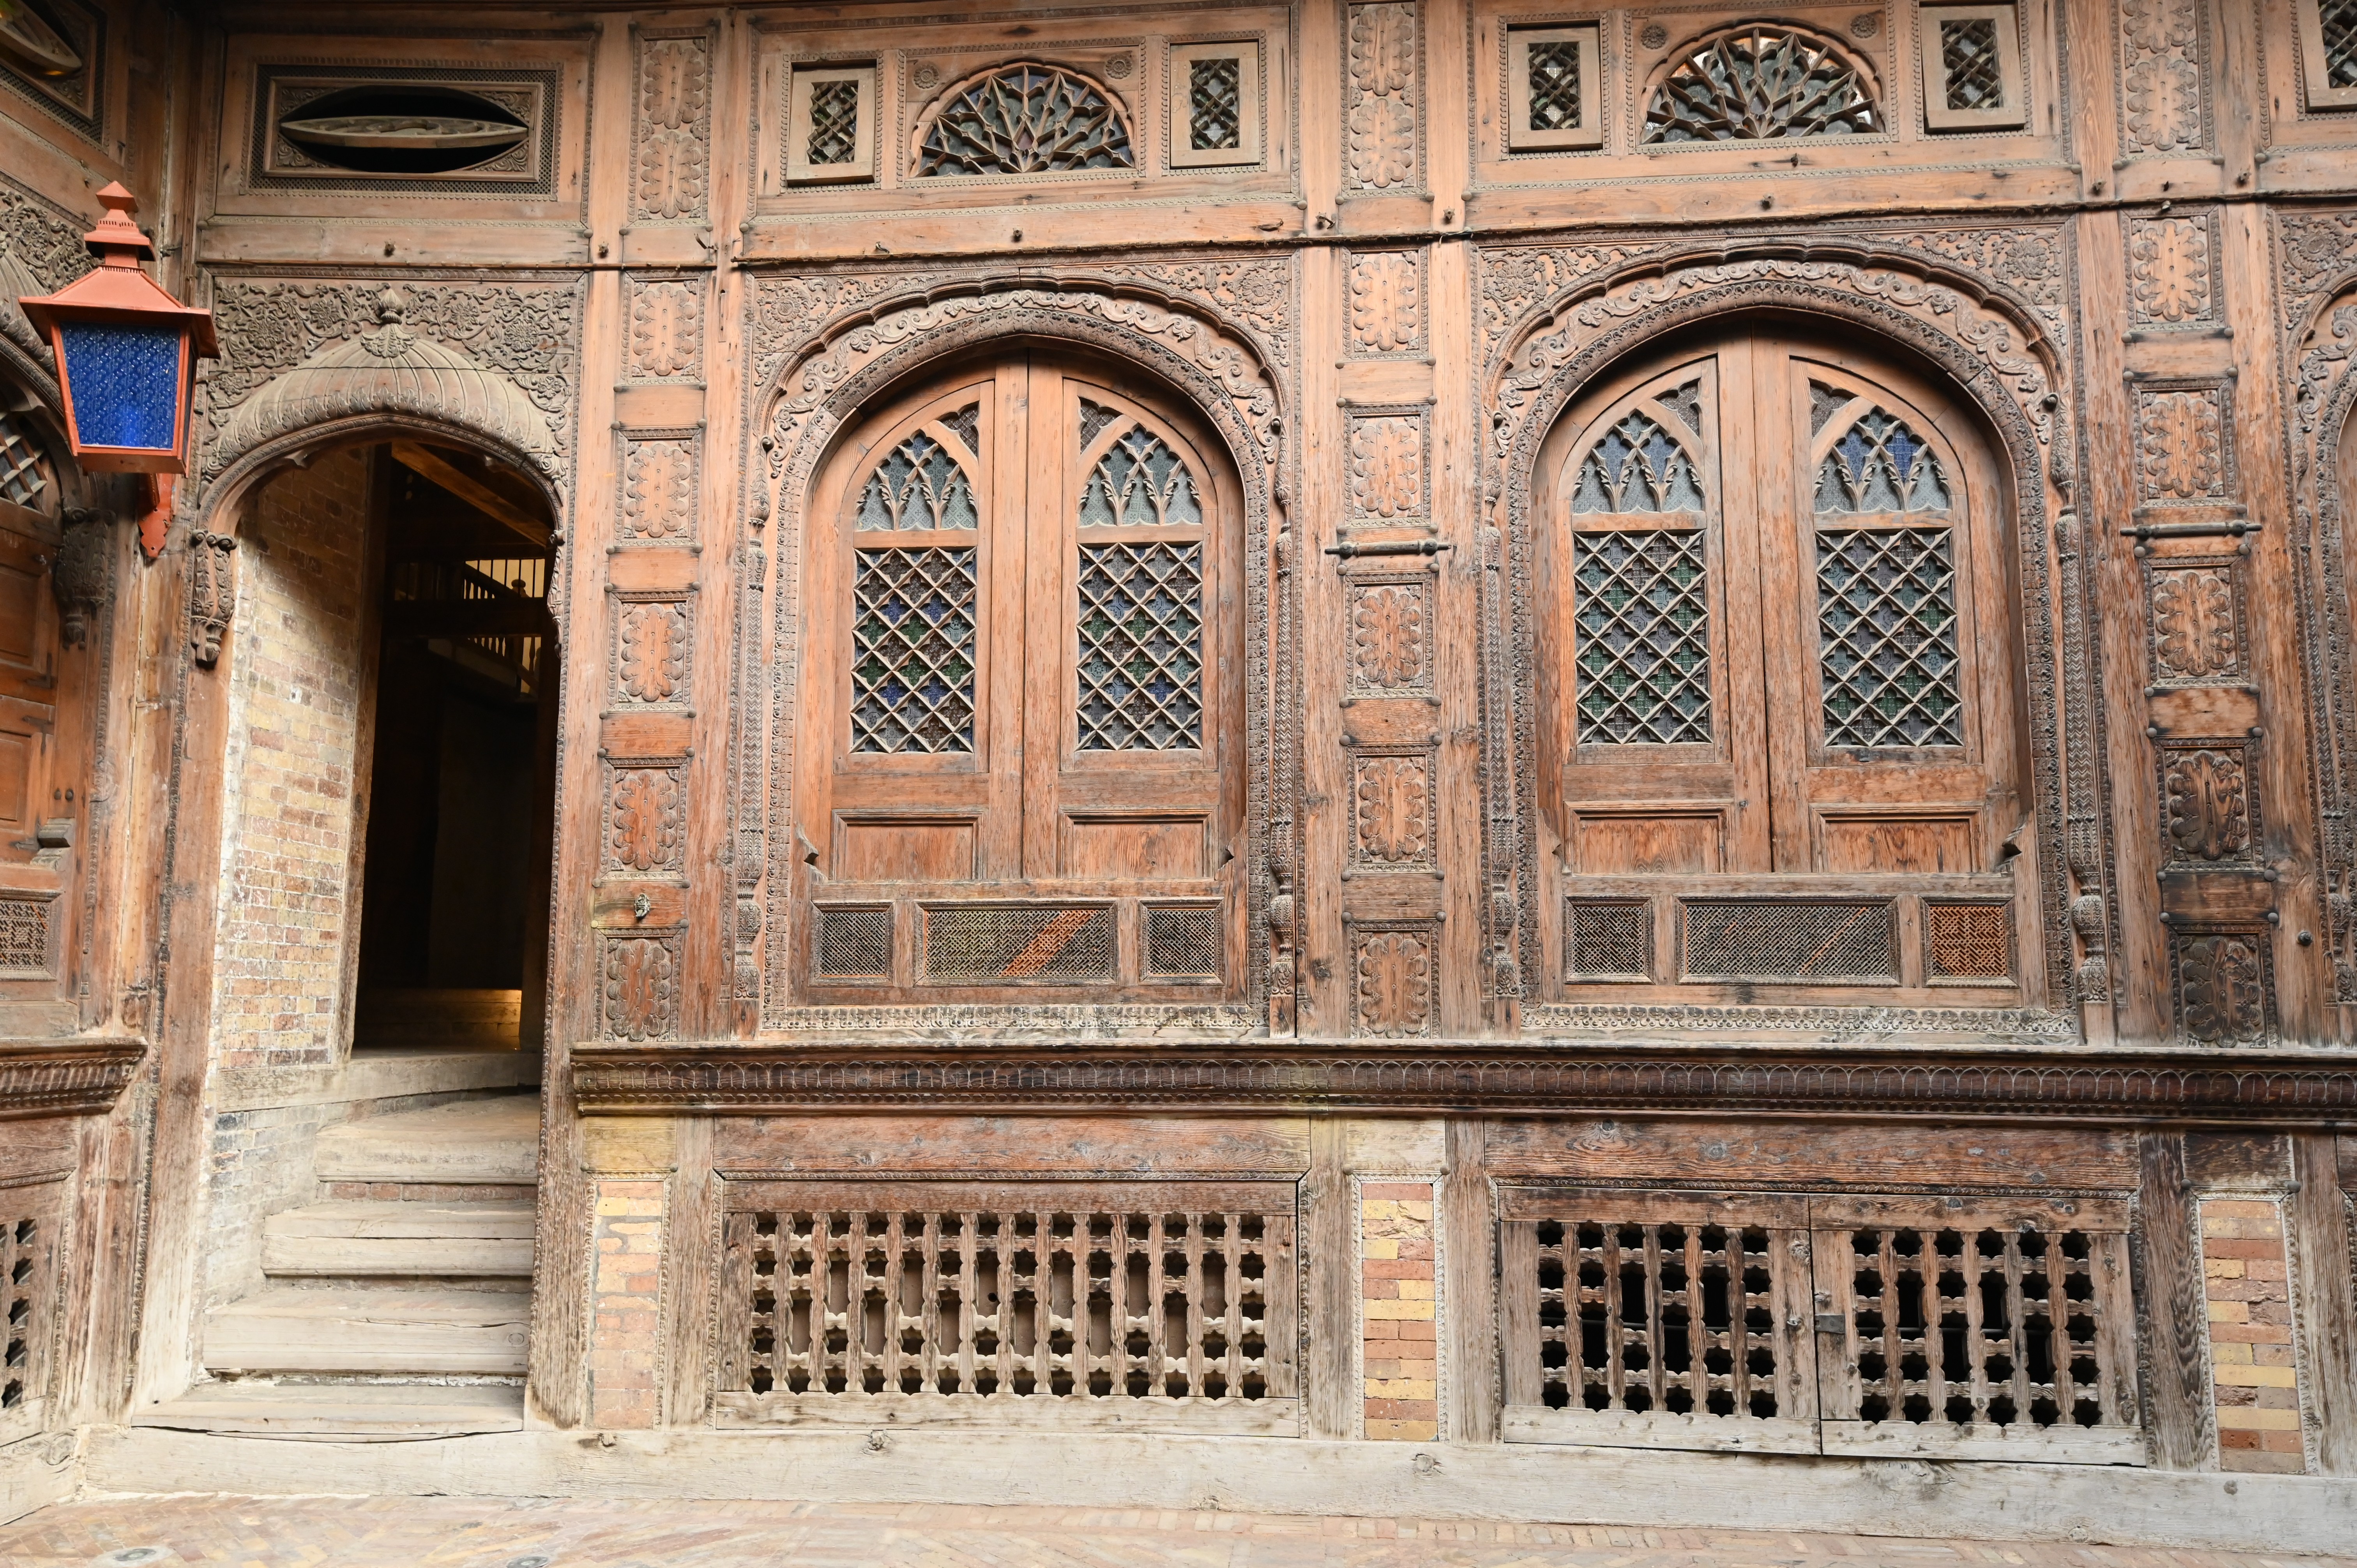 A beautiful wooden work inspired by Central Asian and Gandharan architectures at Sethi House